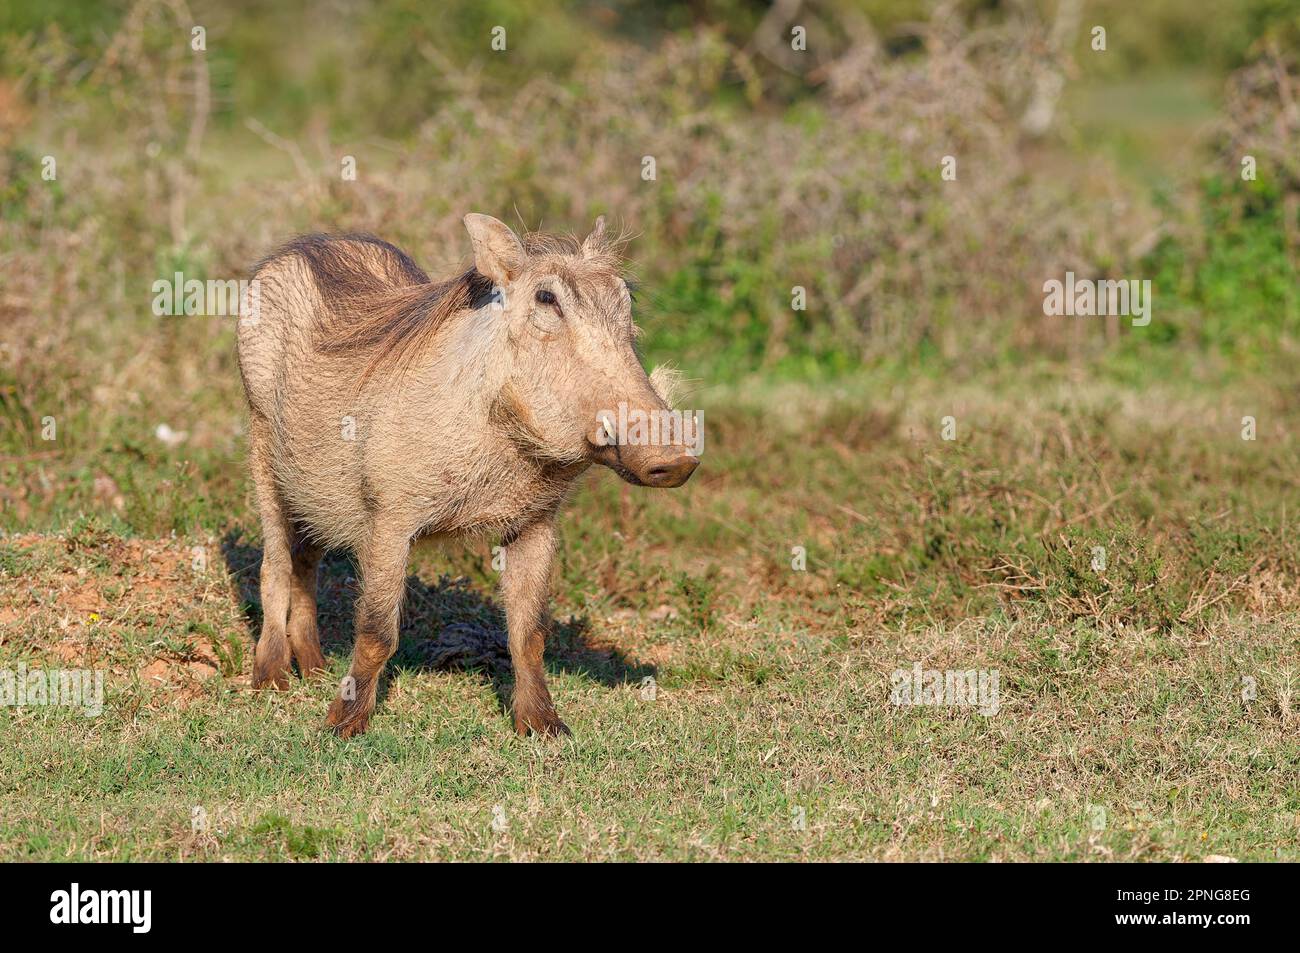 Common warthog (Phacochoerus africanus) standing in the grassland, Addo Elephant National Park, Eastern Cape, South Africa, Africa Stock Photo